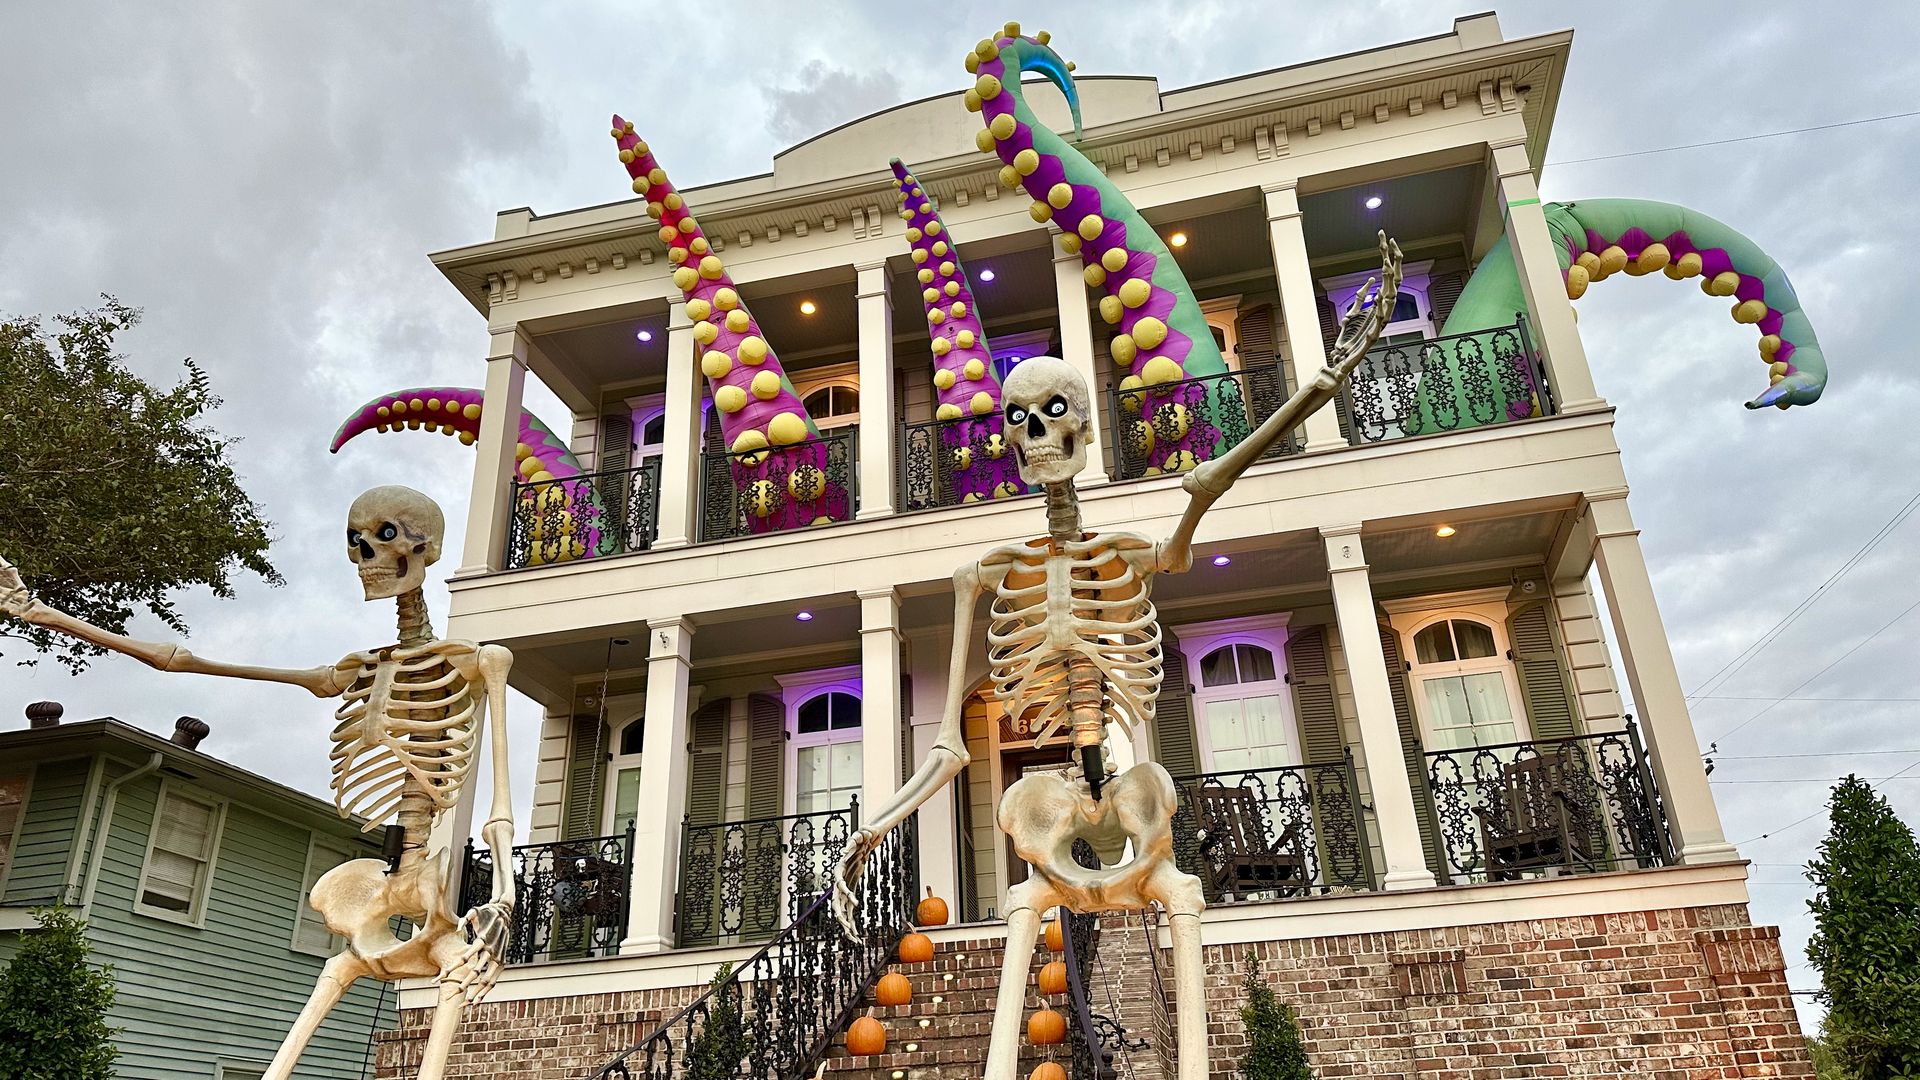 Photo shows giant skeletons in front of a house with tentacles.